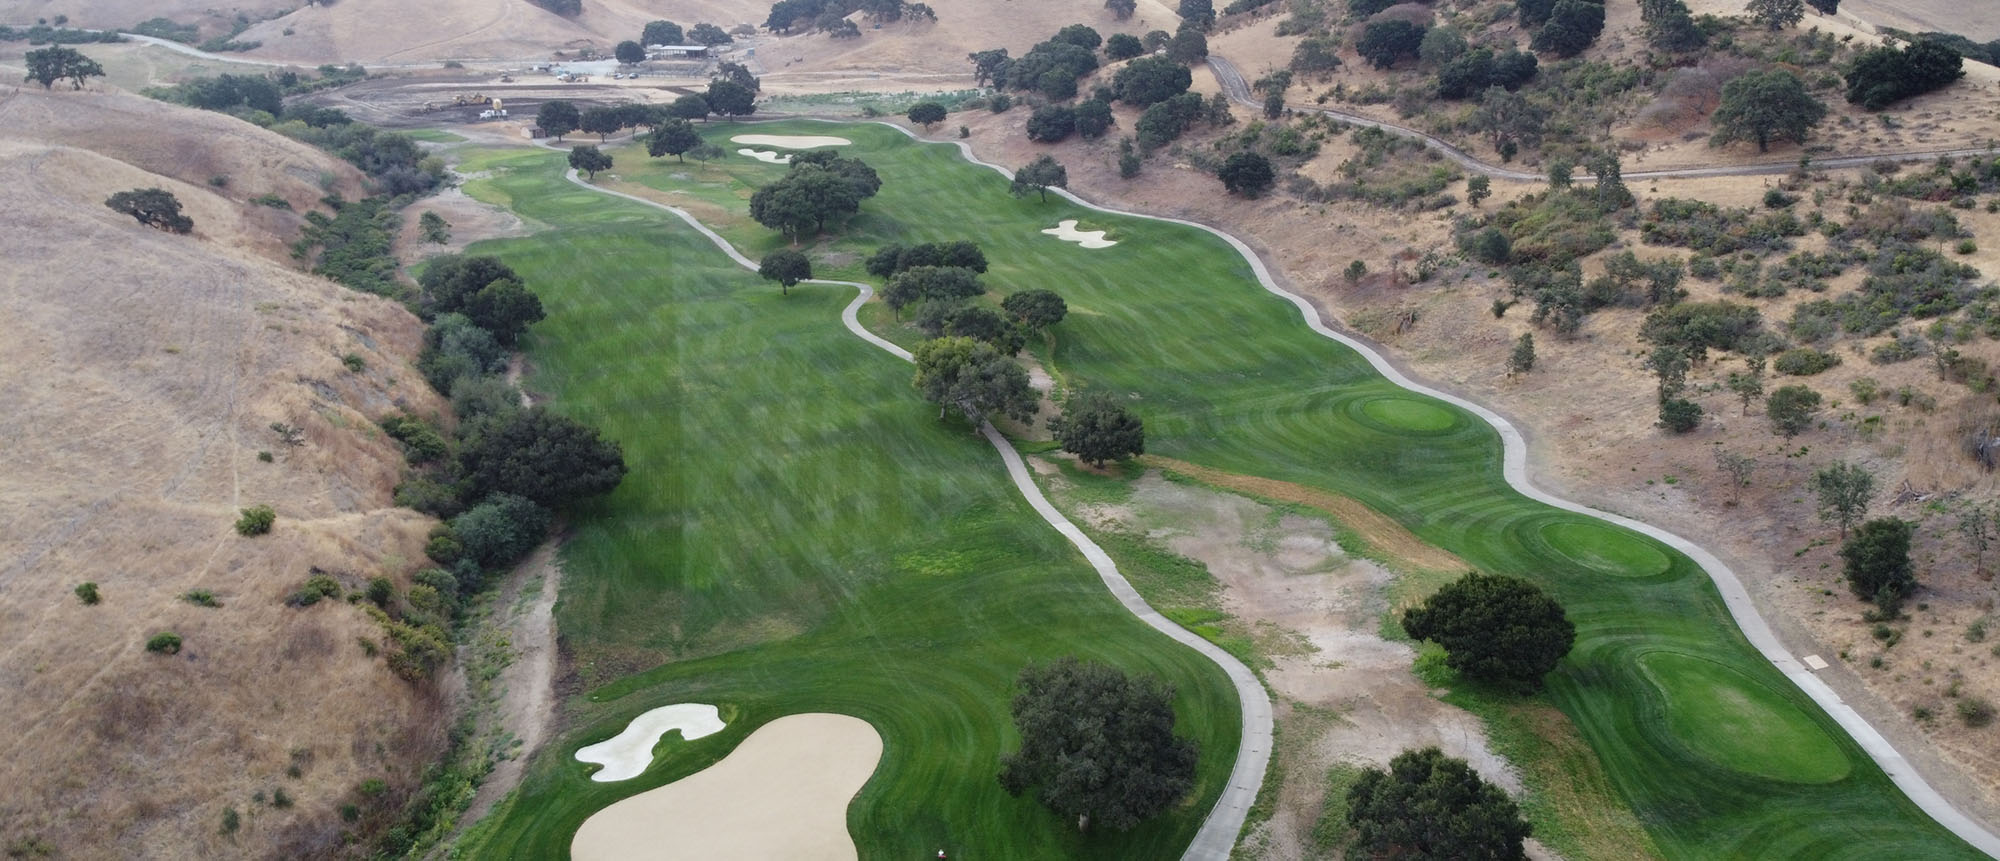 Aerial view of the golf course at San Juan Oaks.